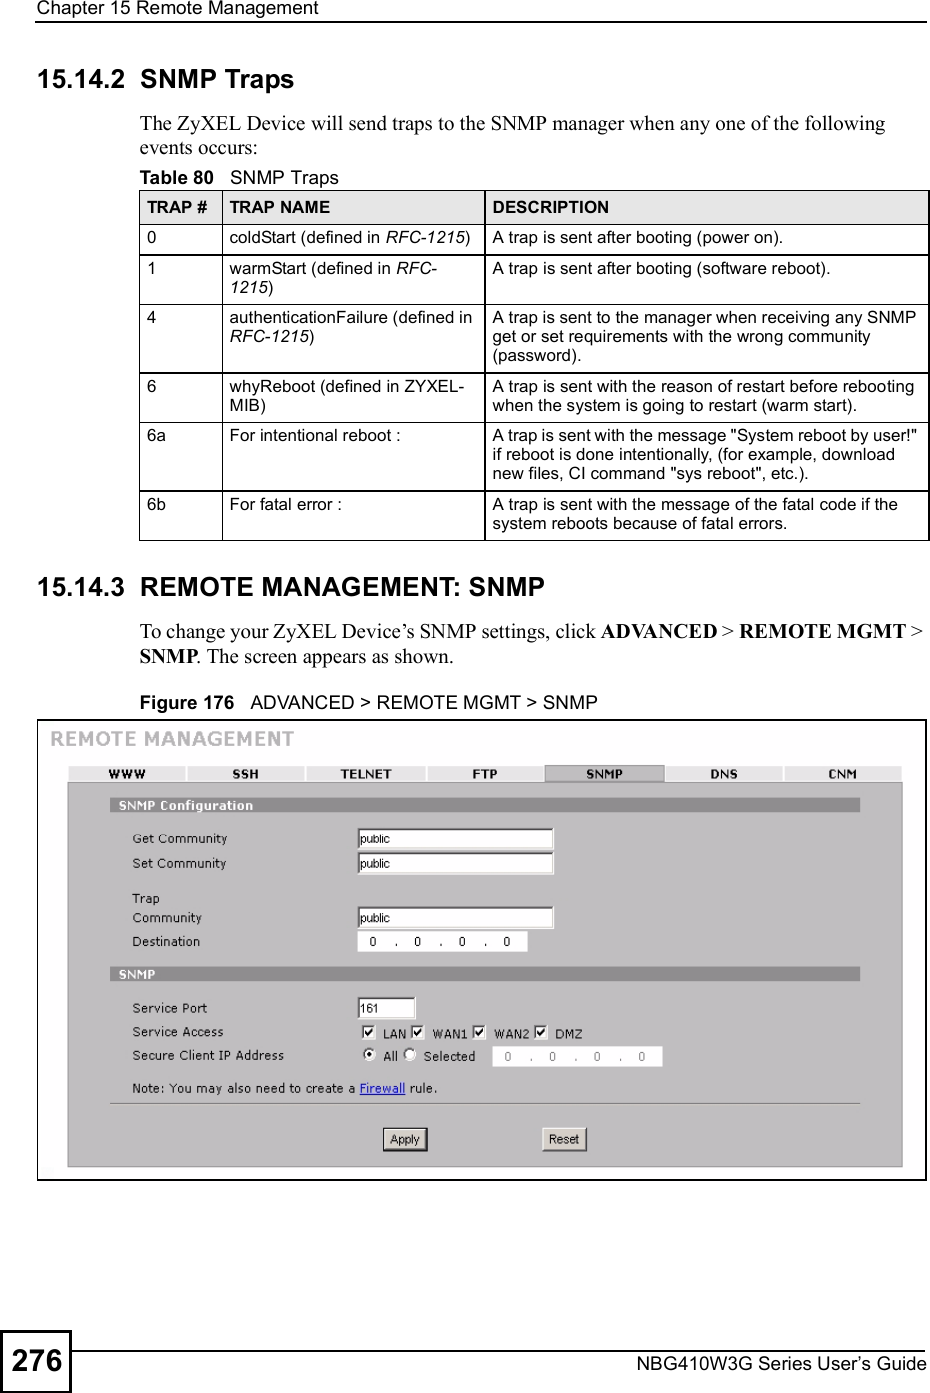 Chapter 15Remote ManagementNBG410W3G Series User s Guide27615.14.2  SNMP Traps The ZyXEL Device will send traps to the SNMP manager when any one of the following events occurs:15.14.3  REMOTE MANAGEMENT: SNMP To change your ZyXEL Device!s SNMP settings, click ADVANCED &gt; REMOTE MGMT &gt; SNMP. The screen appears as shown.Figure 176   ADVANCED &gt; REMOTE MGMT &gt; SNMPTable 80   SNMP TrapsTRAP # TRAP NAME DESCRIPTION0coldStart (defined in RFC-1215)A trap is sent after booting (power on).1warmStart (defined in RFC-1215)A trap is sent after booting (software reboot).4authenticationFailure (defined in RFC-1215)A trap is sent to the manager when receiving any SNMP get or set requirements with the wrong community (password).6whyReboot (defined in ZYXEL-MIB)A trap is sent with the reason of restart before rebooting when the system is going to restart (warm start).6a For intentional reboot : A trap is sent with the message &quot;System reboot by user!&quot; if reboot is done intentionally, (for example, download new files, CI command &quot;sys reboot&quot;, etc.).6b For fatal error :  A trap is sent with the message of the fatal code if the system reboots because of fatal errors.